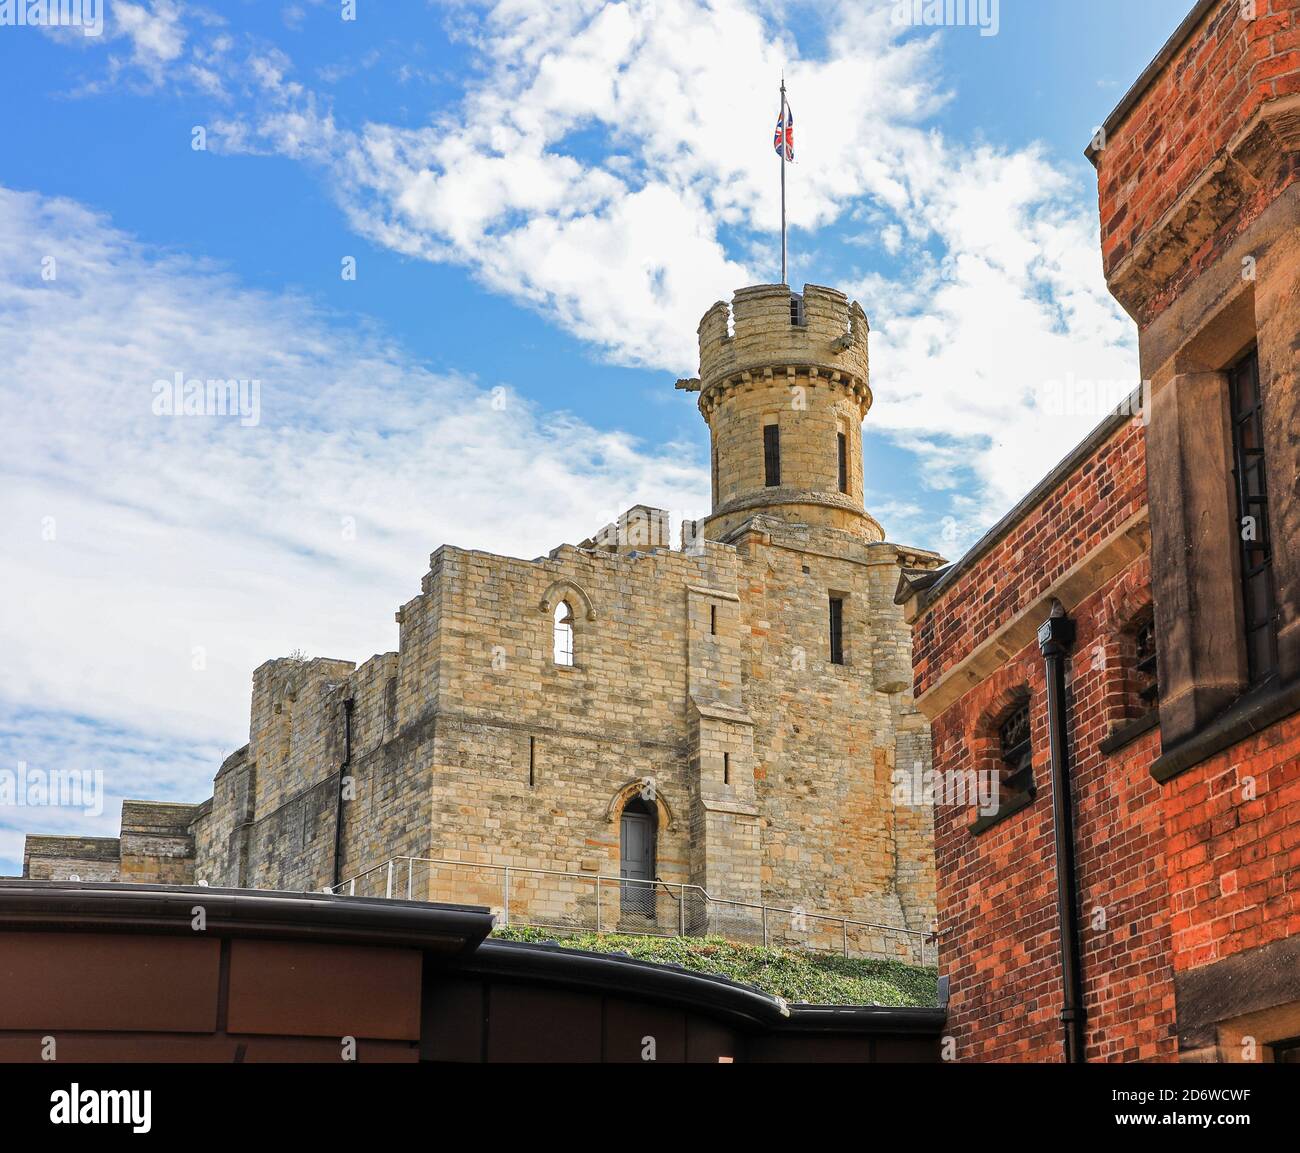 The Observatory Tower, Lincoln Castle, City of Lincoln, Lincolnshire, England, UK Foto Stock